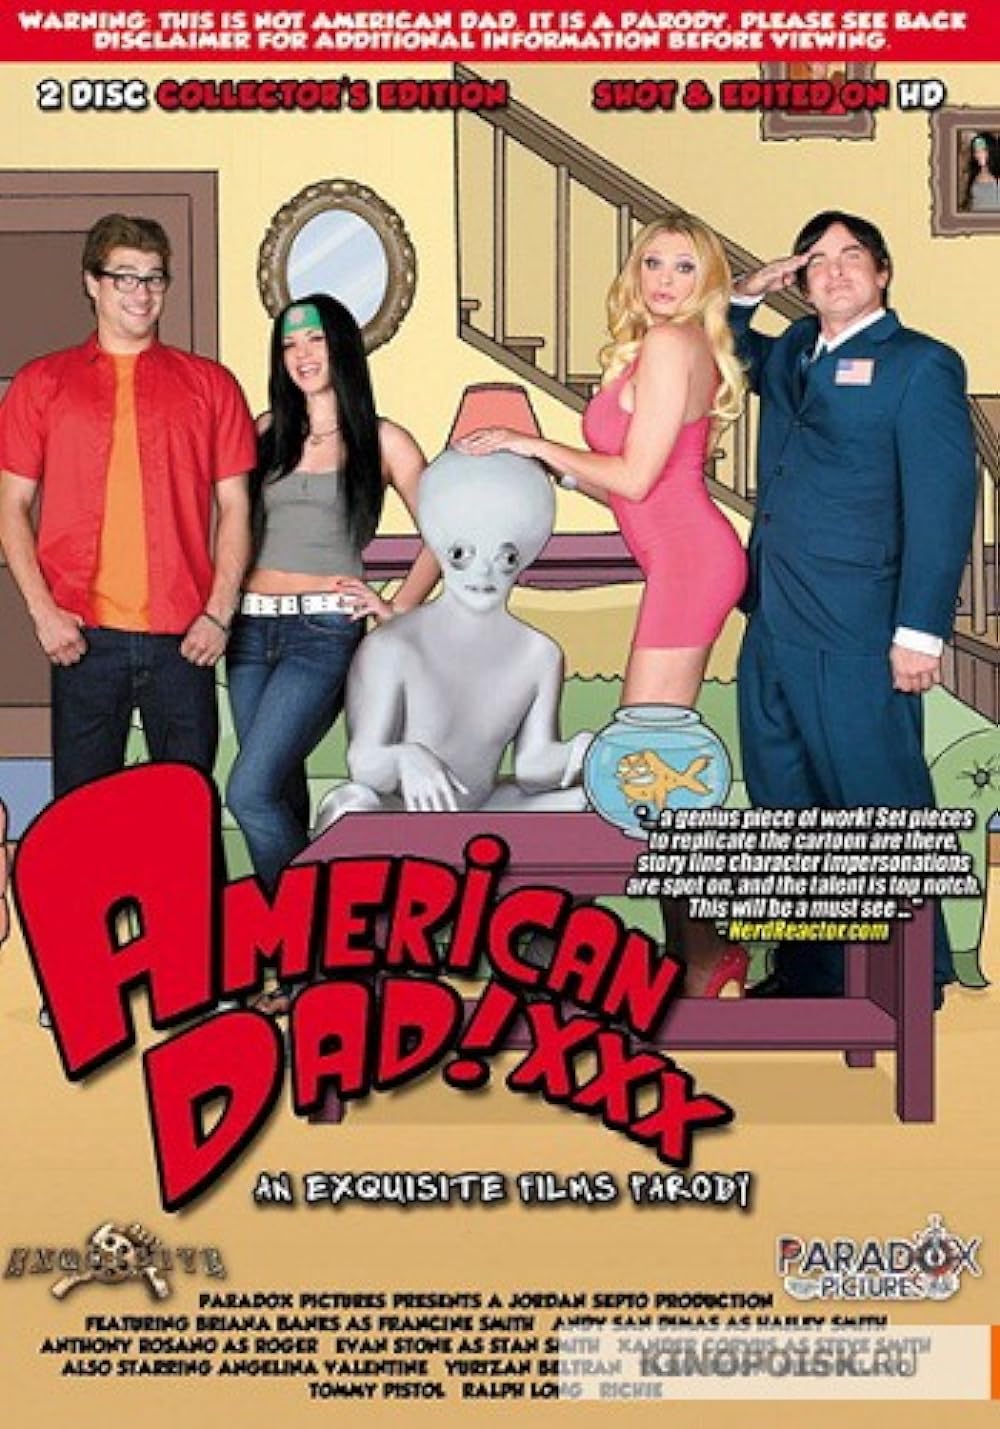 ain amira recommends american dad parody xxx pic